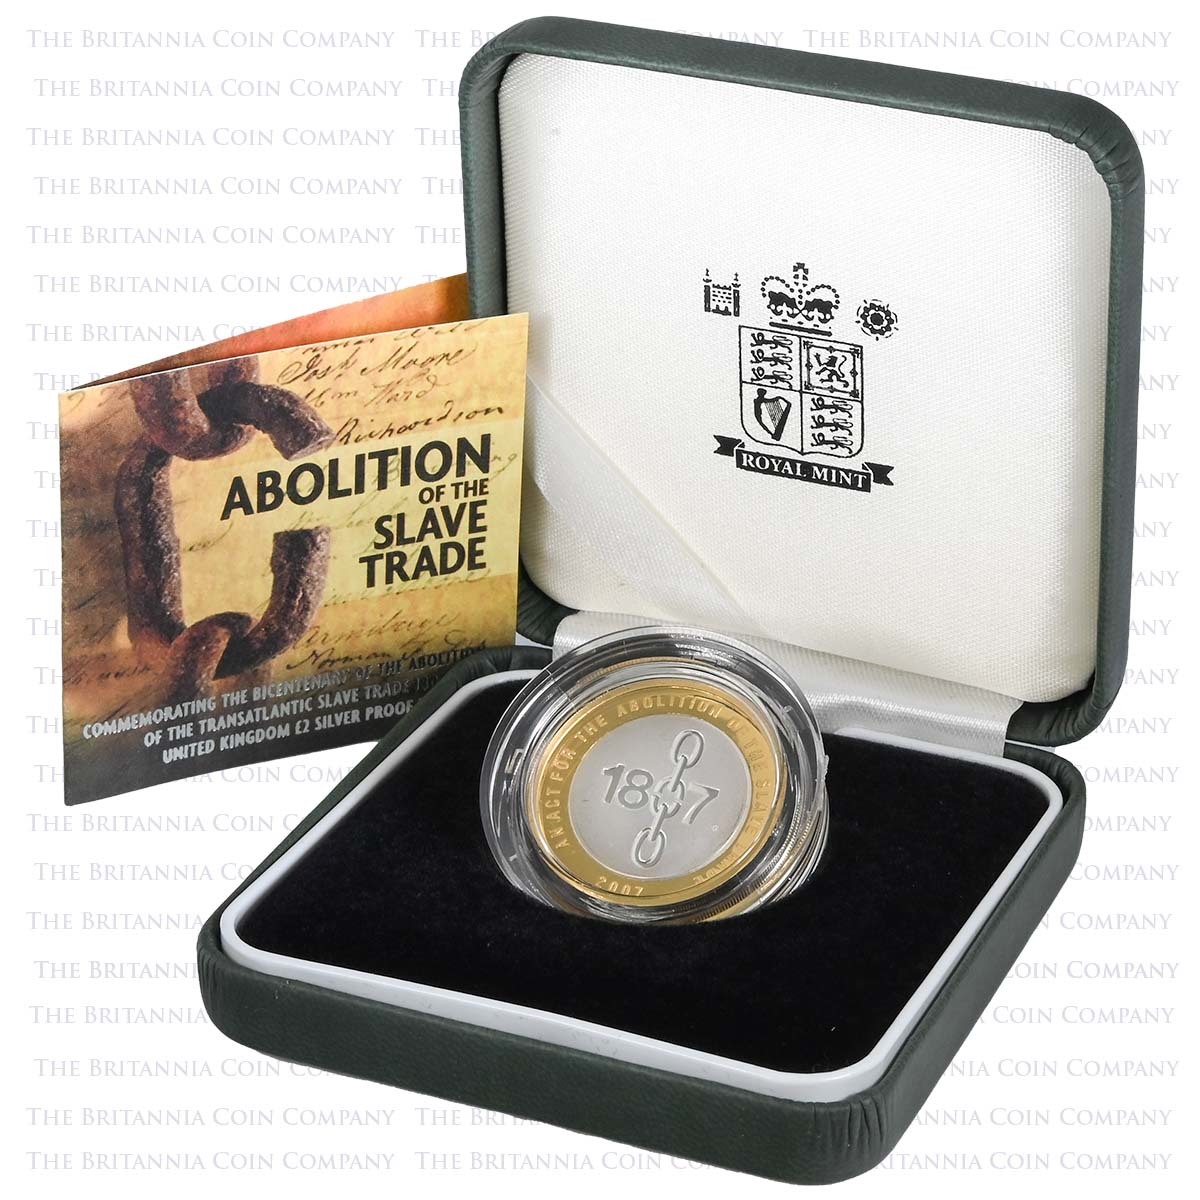 UKASTPF 2007 Abolition of the Slave Trade £2 Piedfort Silver Proof Boxed